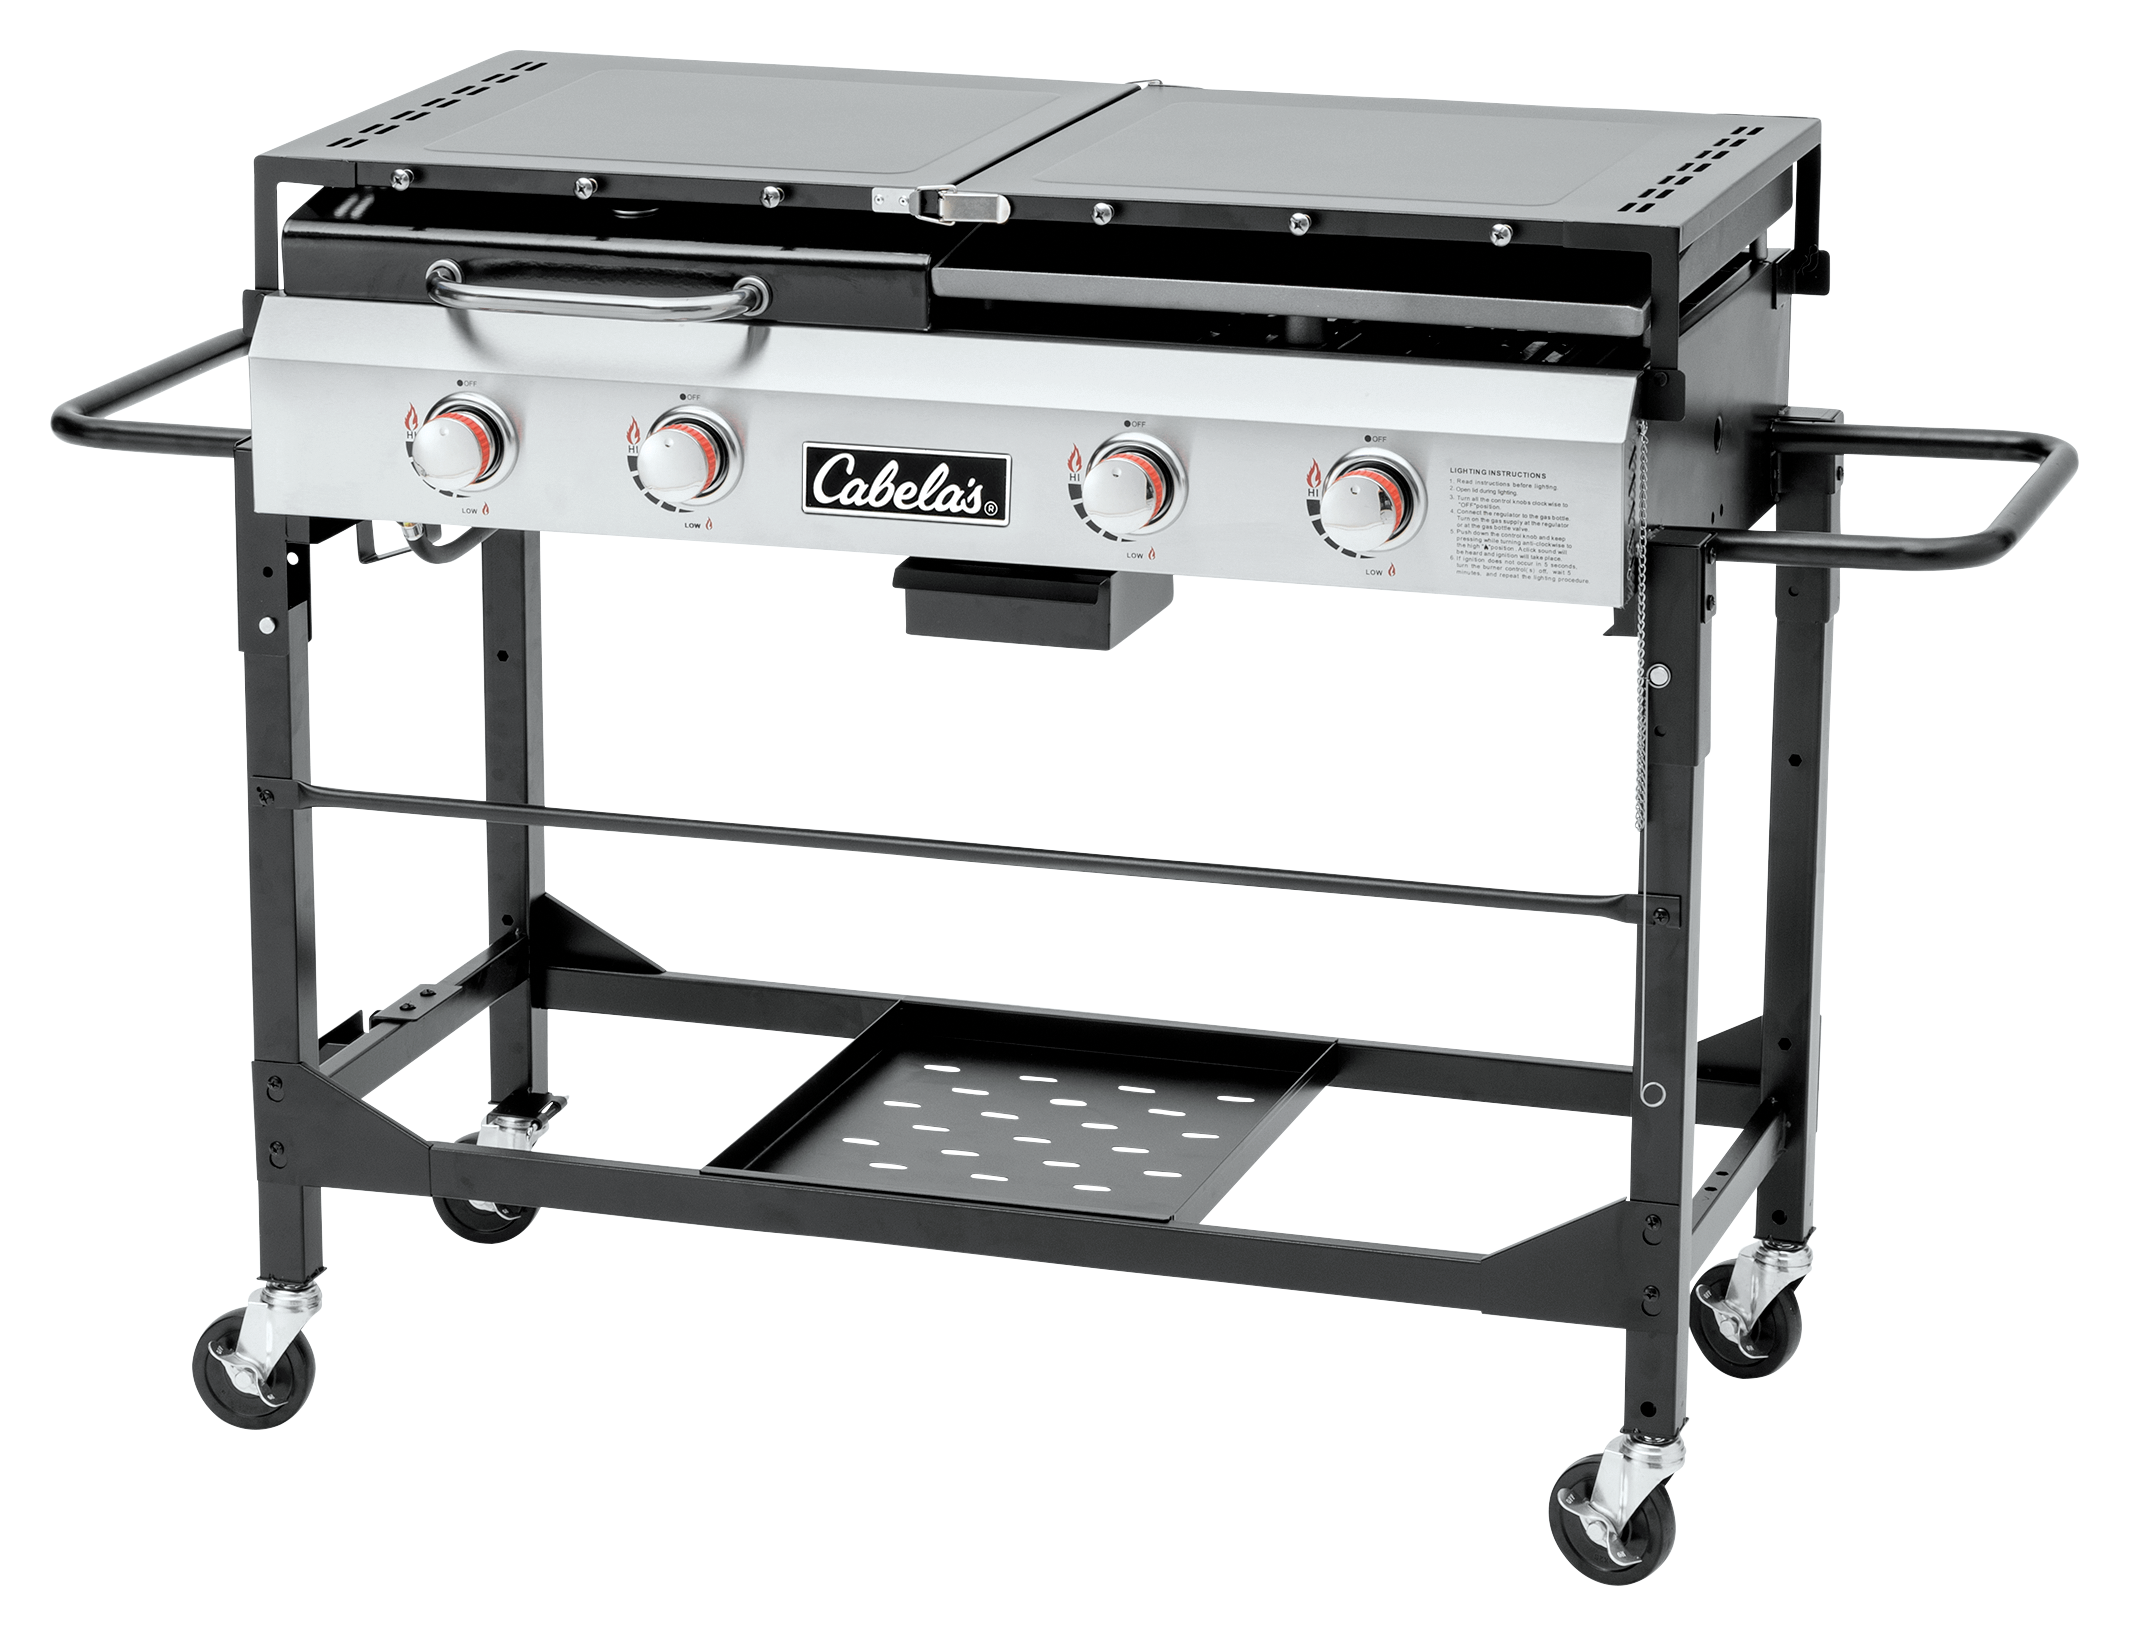 Camp Stove Add On Griddle with Grease Tray or Trap; Ships FREE within  Contiguous USA